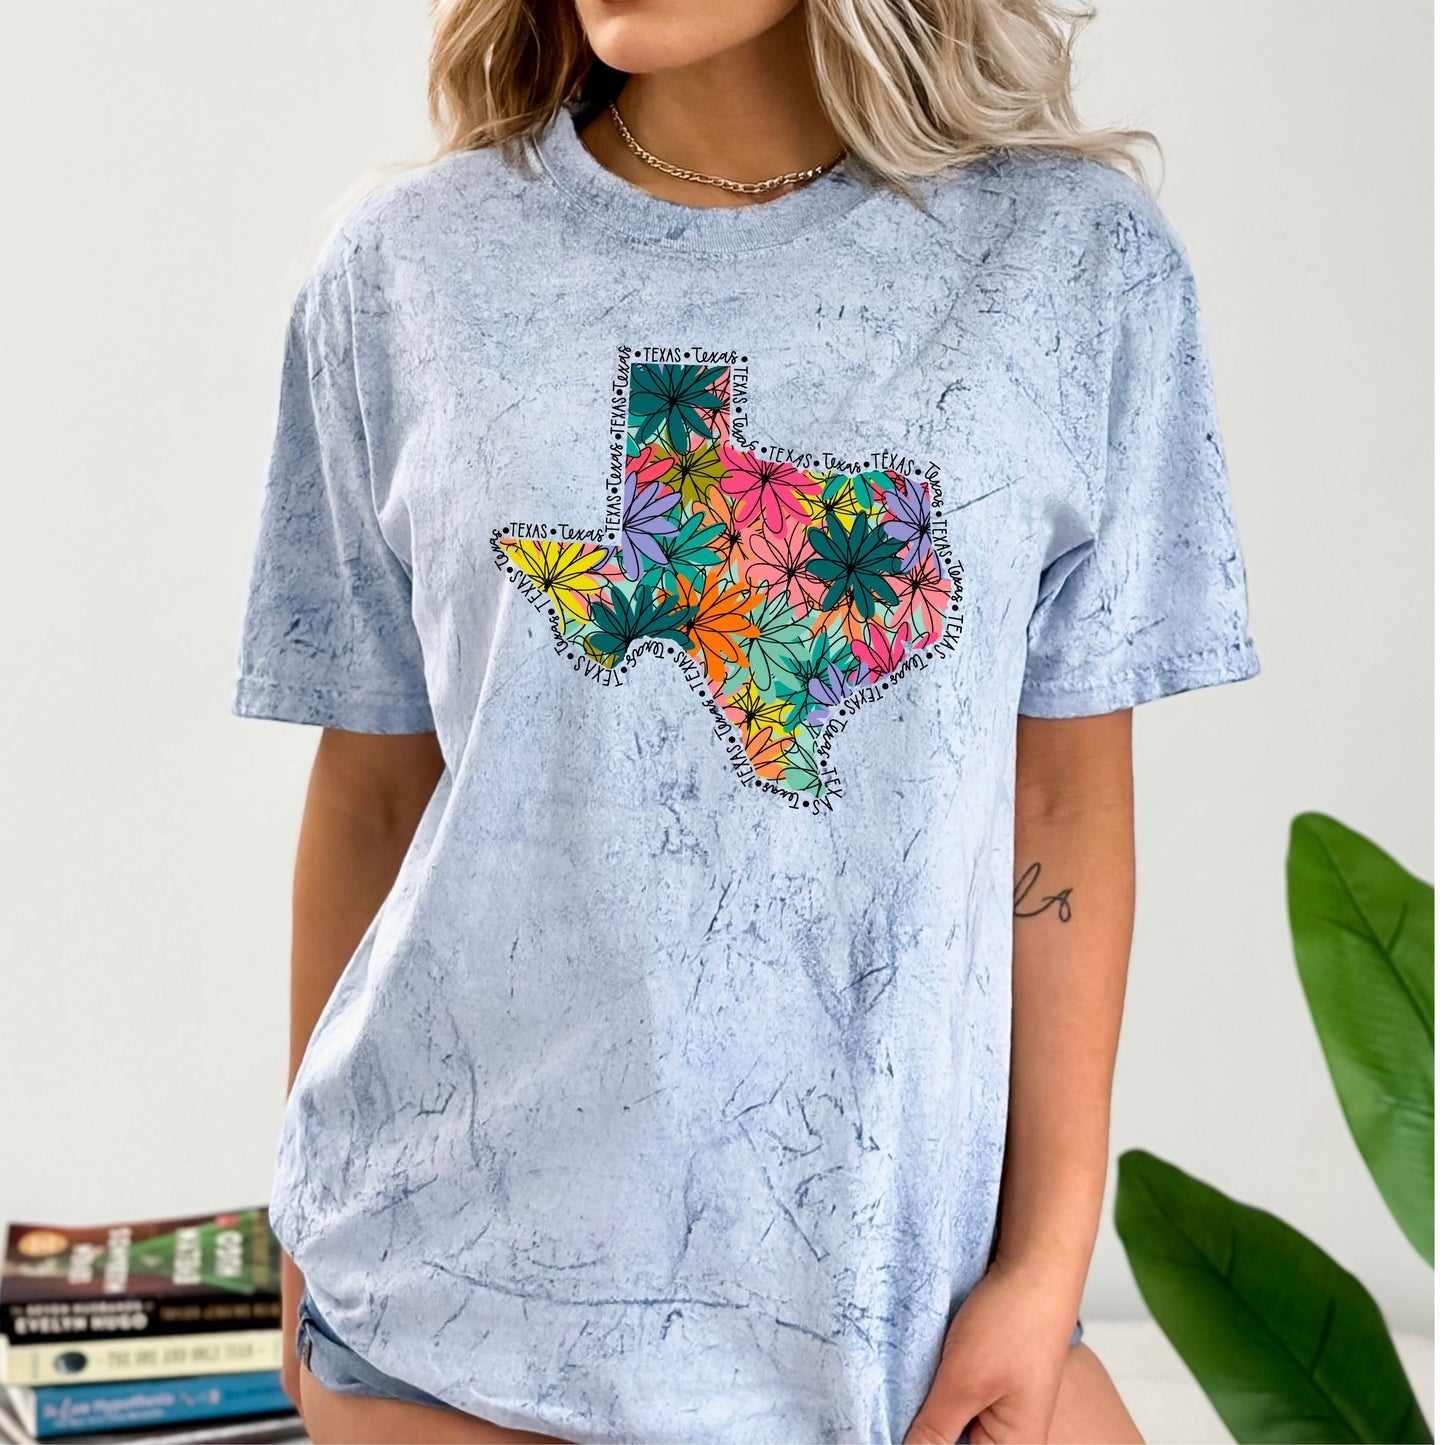 Floral Texas T-Shirt, Texas T-Shirt With Texas Around Outside and Floral Inside, Texas Floral Gifts For Her, Gifts For Mom, Friend Gift